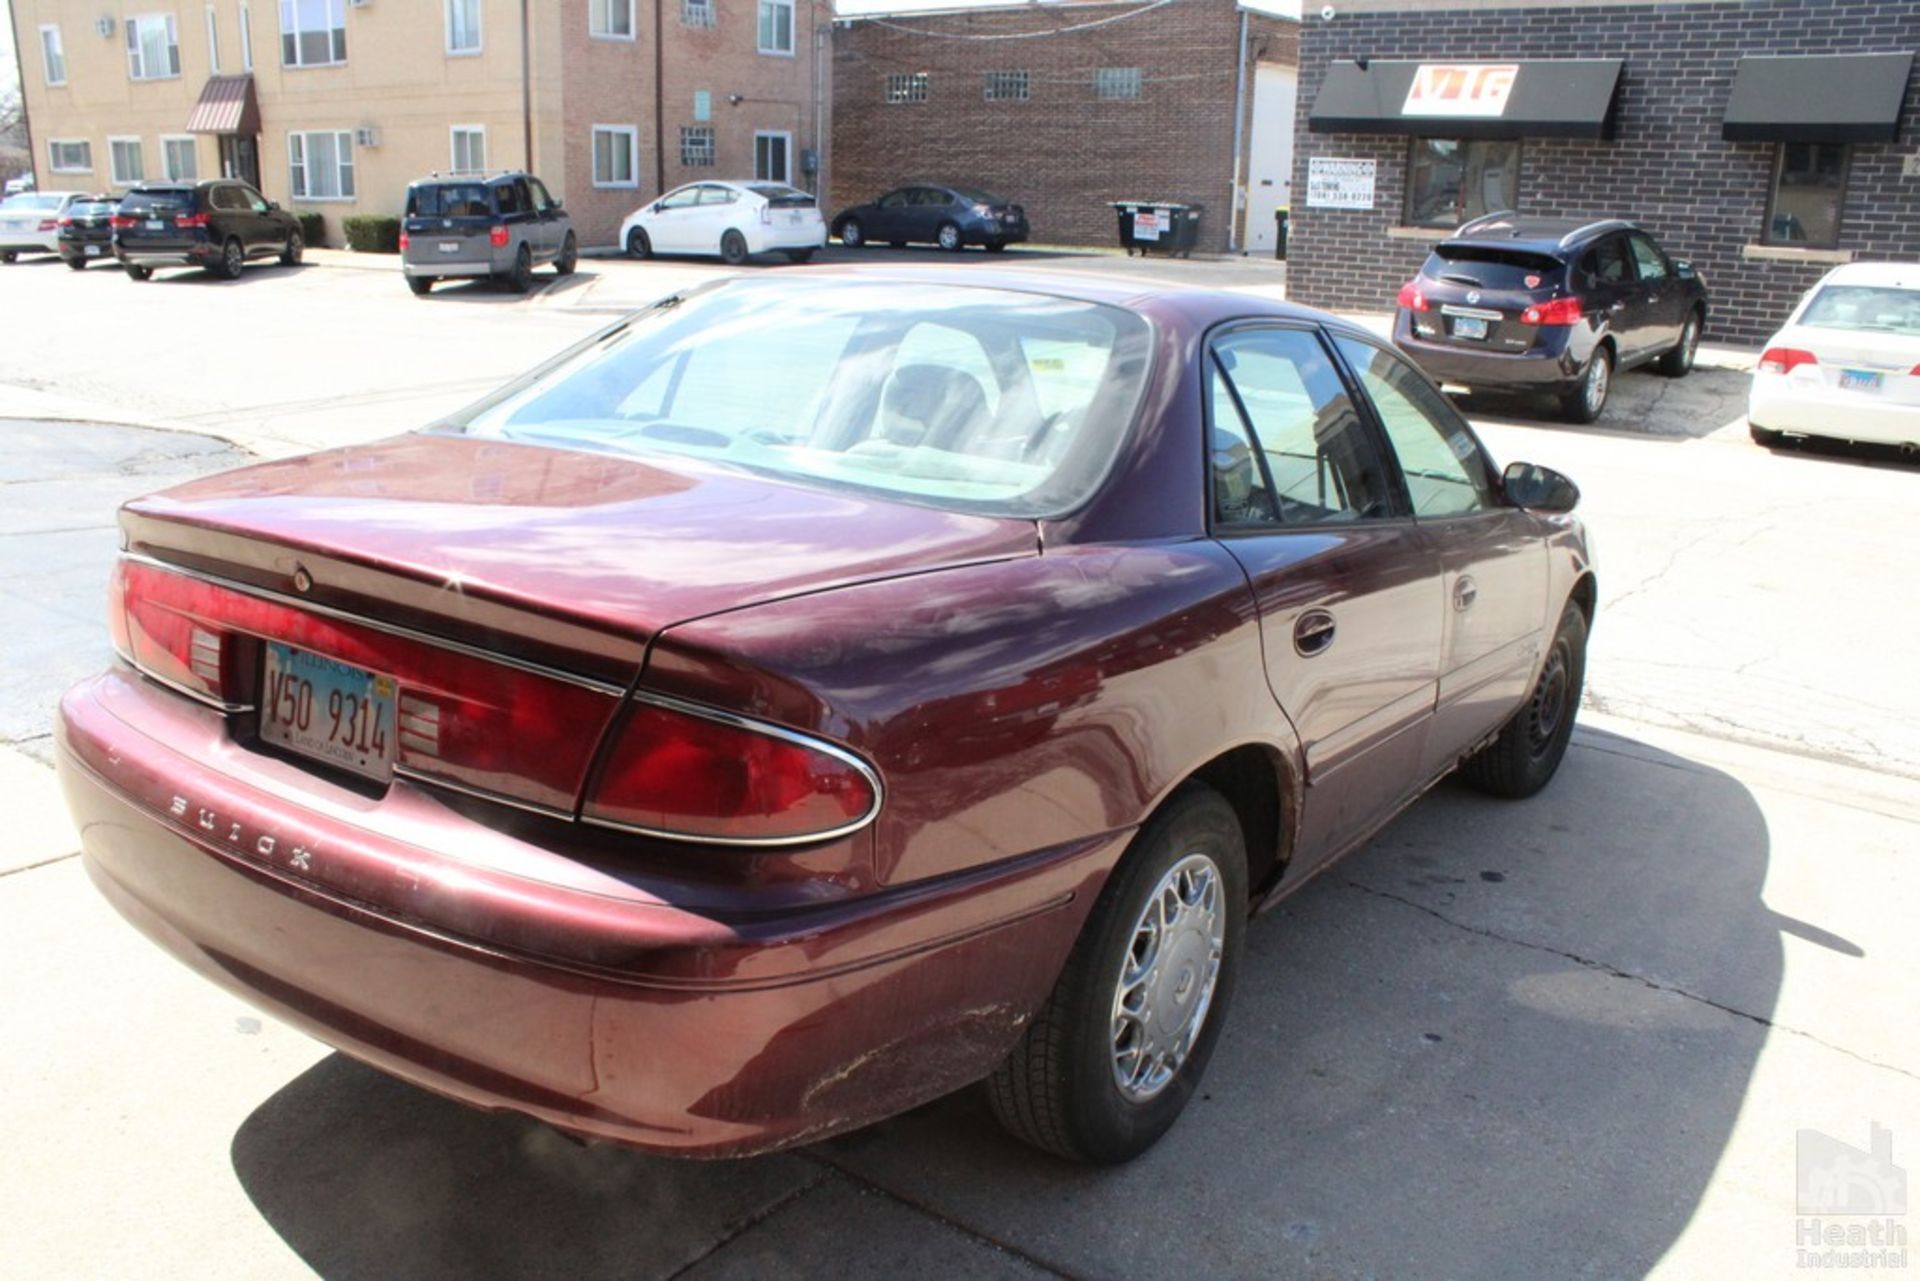 2000 BUICK MODEL CENTURY AUTOMOBILE, VIN: 2G4AS52J511184800, AUTOMATIC TRANSMISSION, CAN'T READ - Image 3 of 7